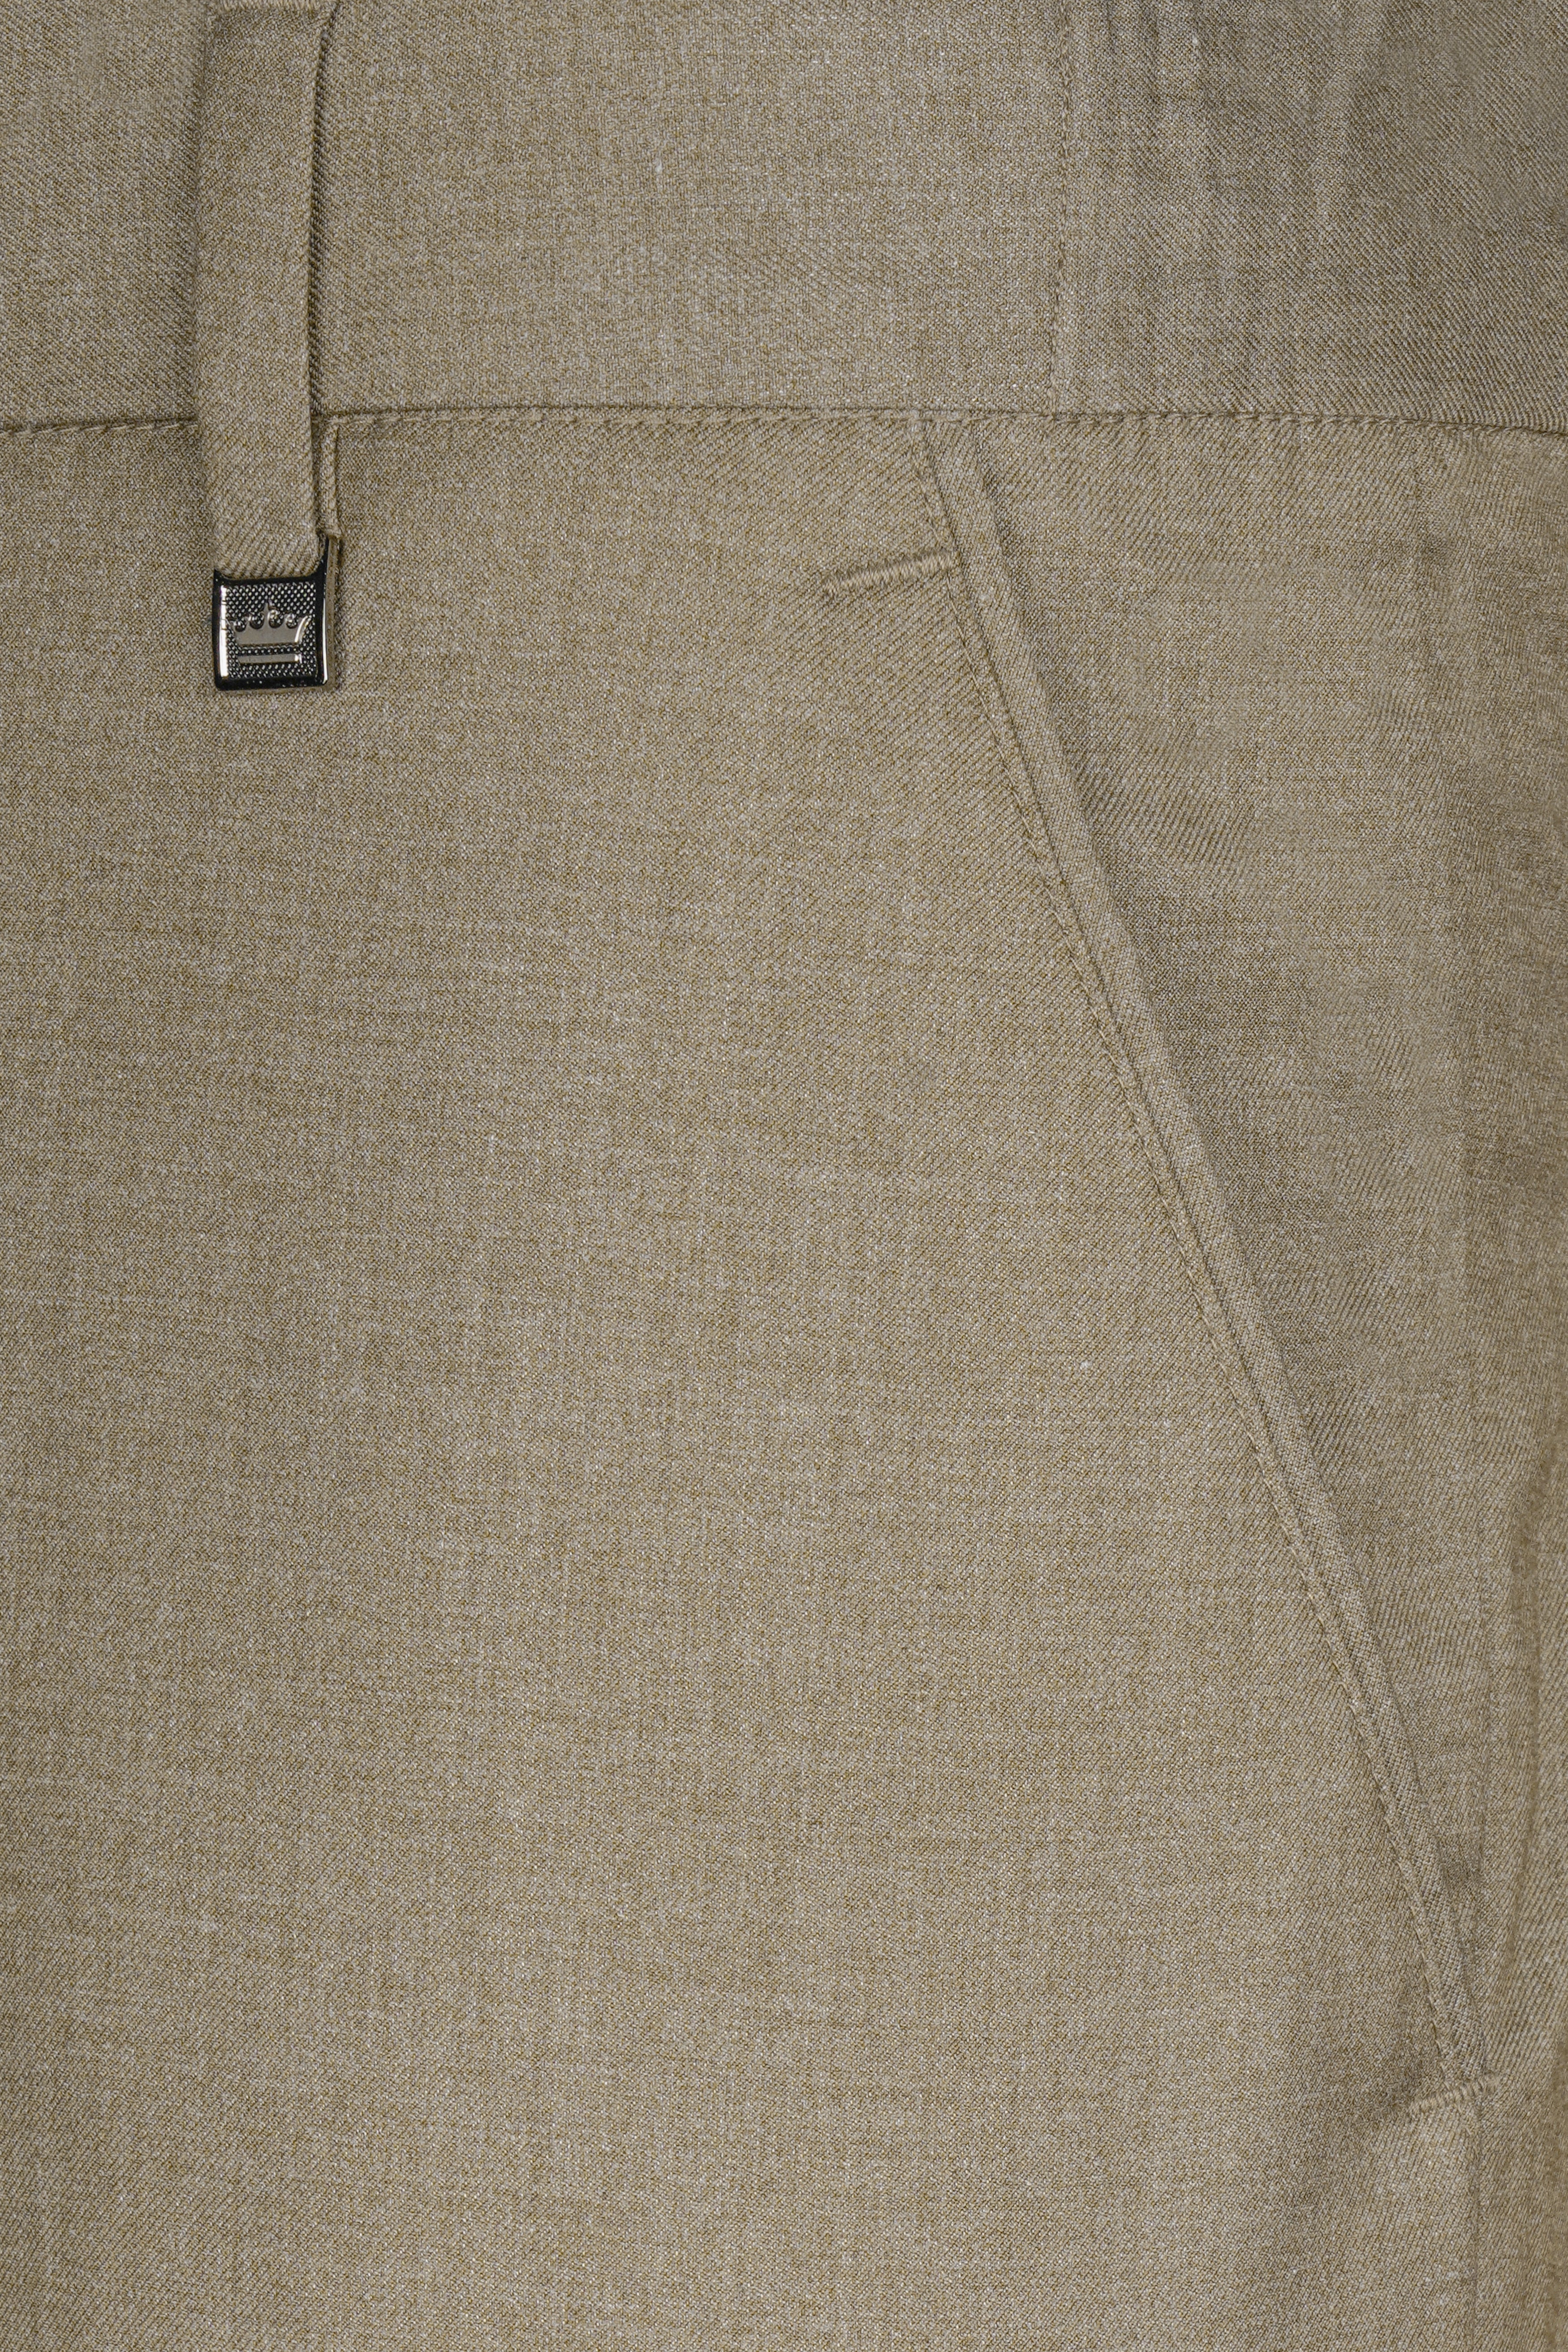 Stonewall Brown Wool Rich Double Breasted Suit ST3044-DB-PP-36, ST3044-DB-PP-38, ST3044-DB-PP-40, ST3044-DB-PP-42, ST3044-DB-PP-44, ST3044-DB-PP-46, ST3044-DB-PP-48, ST3044-DB-PP-50, ST3044-DB-PP-52, ST3044-DB-PP-54, ST3044-DB-PP-56, ST3044-DB-PP-58, ST3044-DB-PP-60